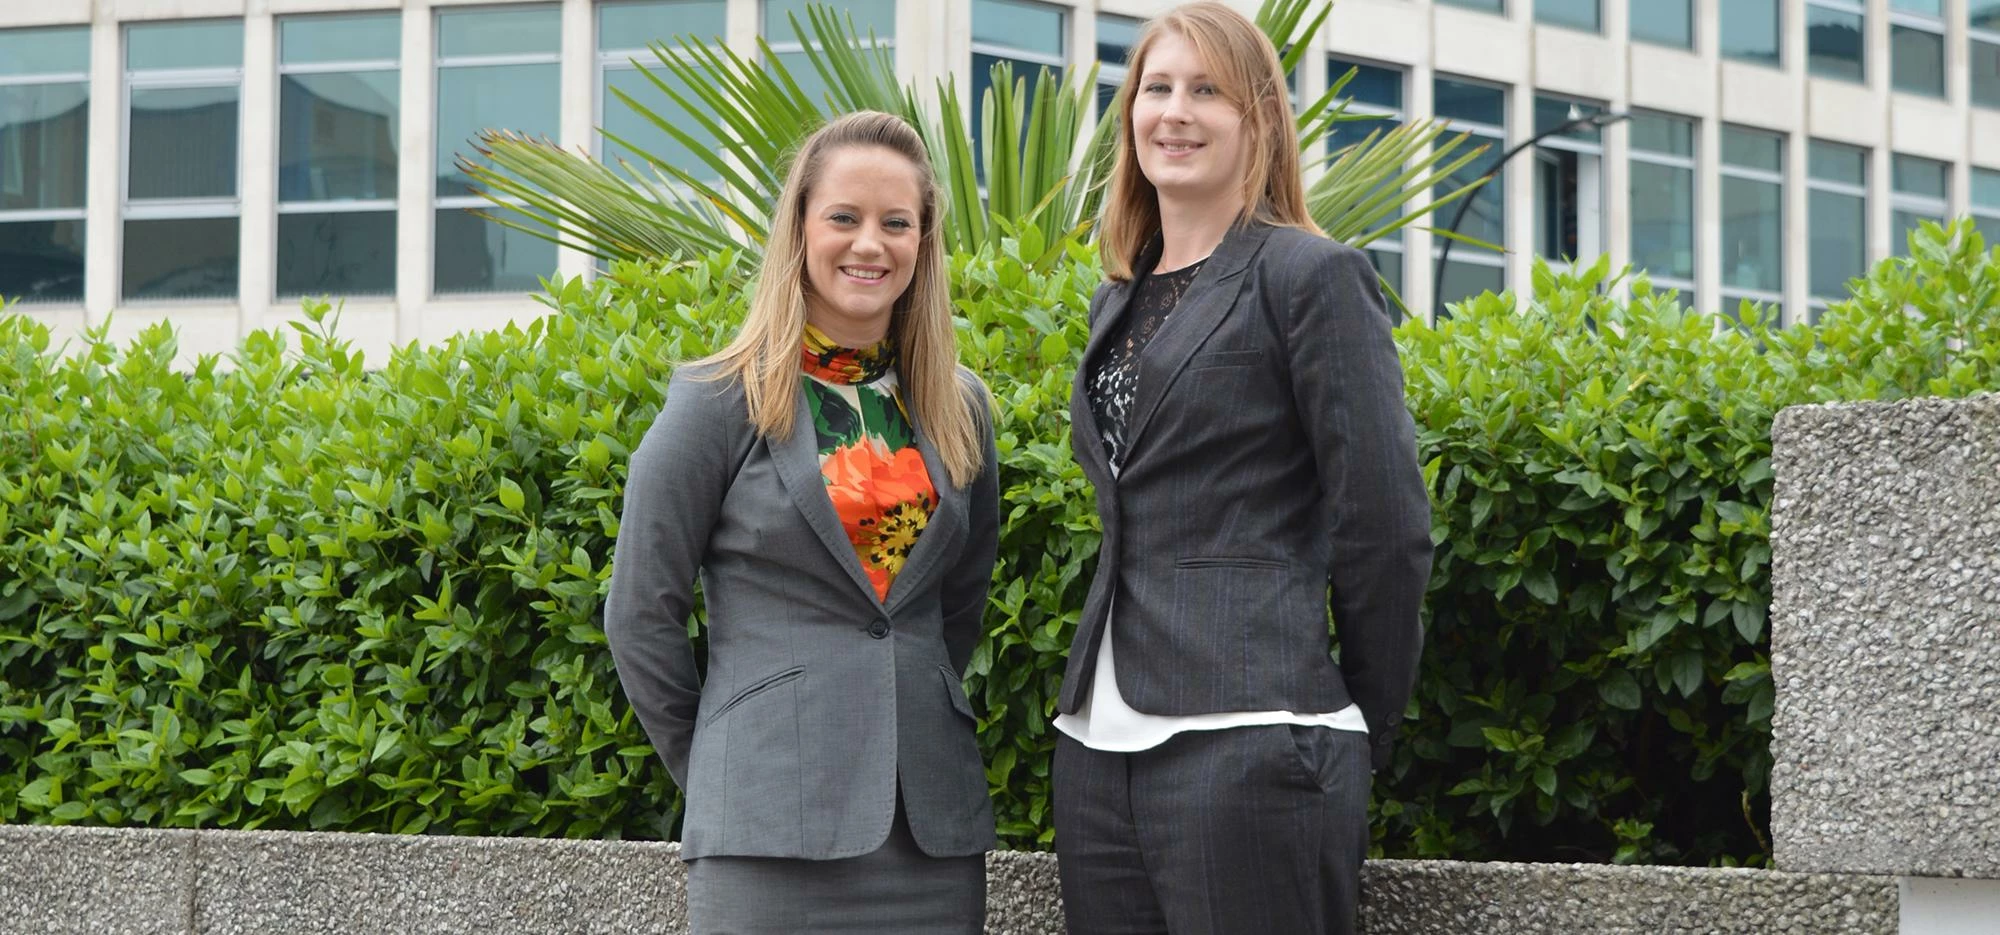 Taylor&Emmet's new contentious probate and employment law experts, Stacie Hurt (left) and Kelly Gibs